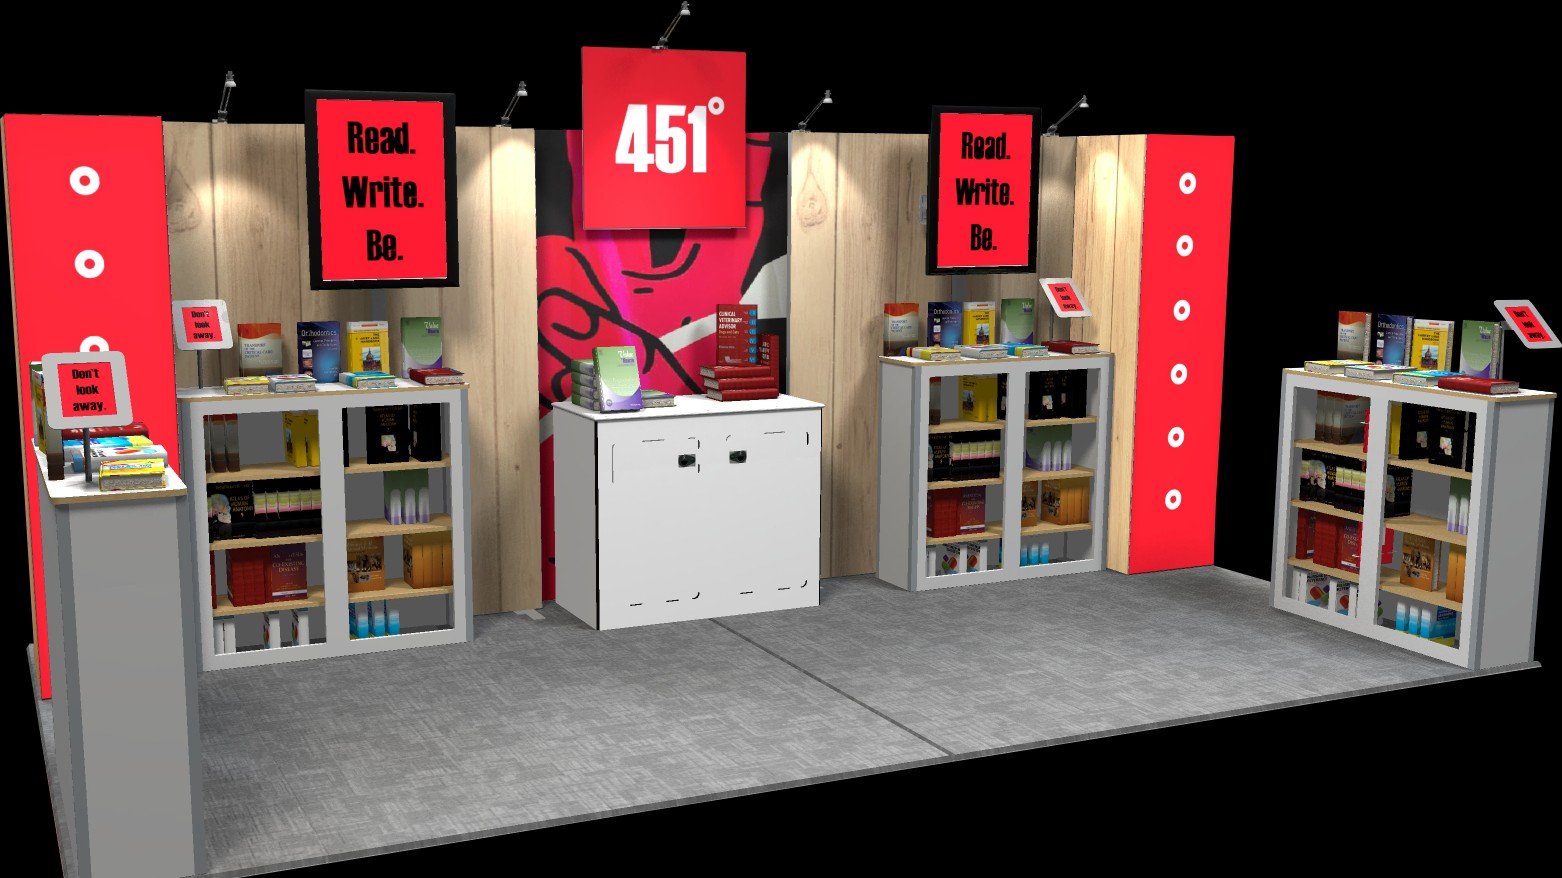  3 Questions to Ask When Deciding on a Trade Show Display Rental 